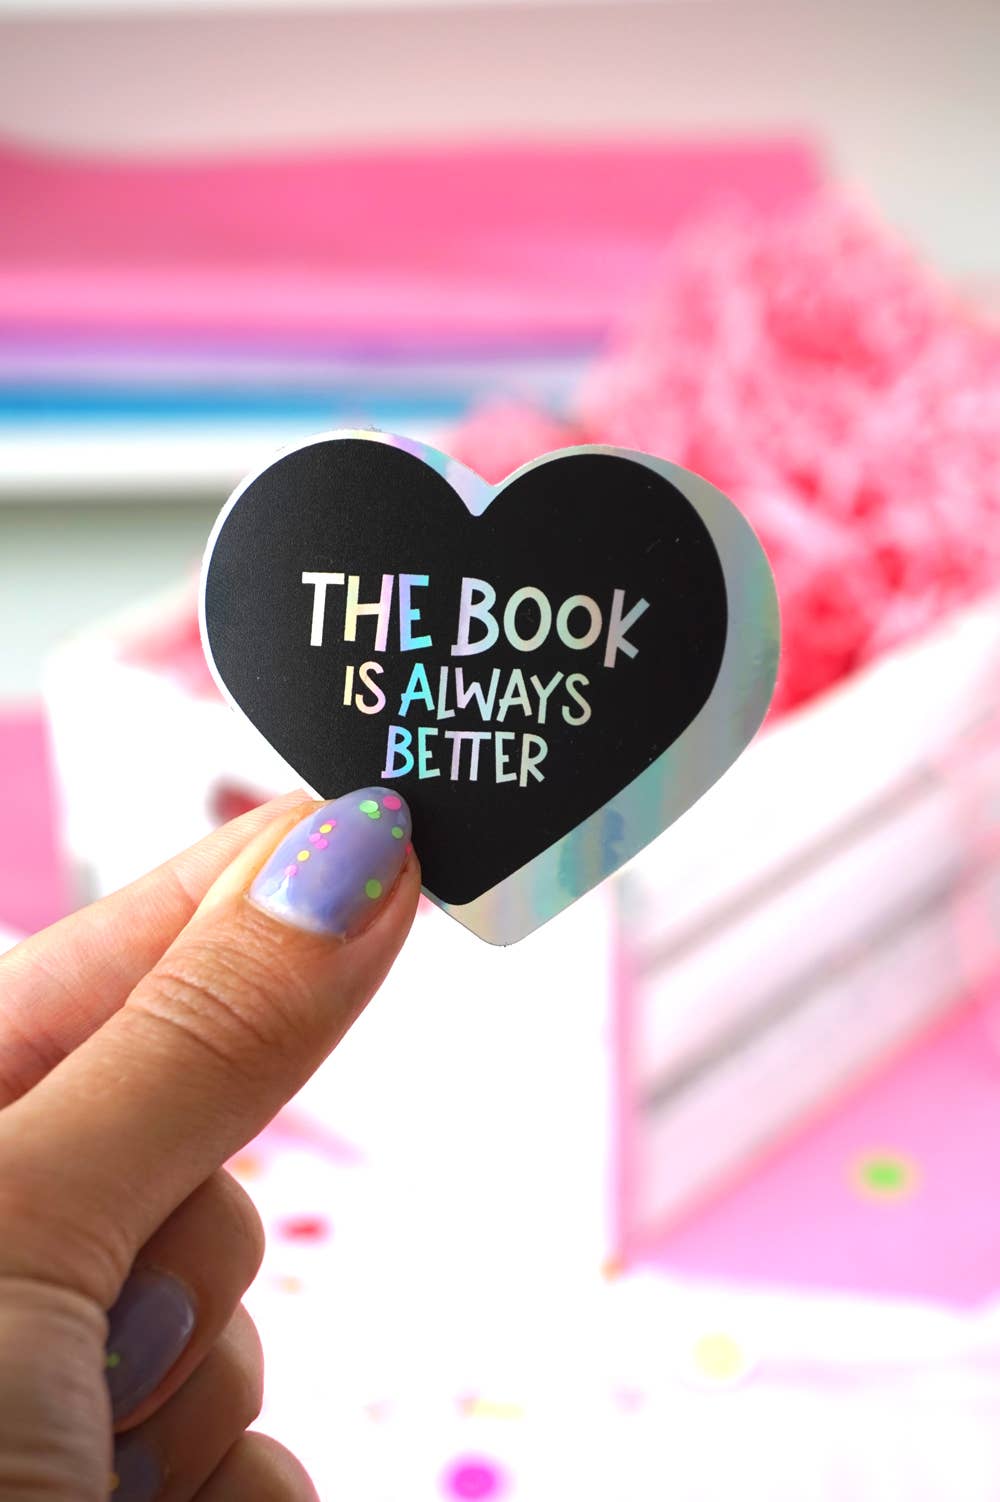 The book is always better - Bookish sticker book lover trope